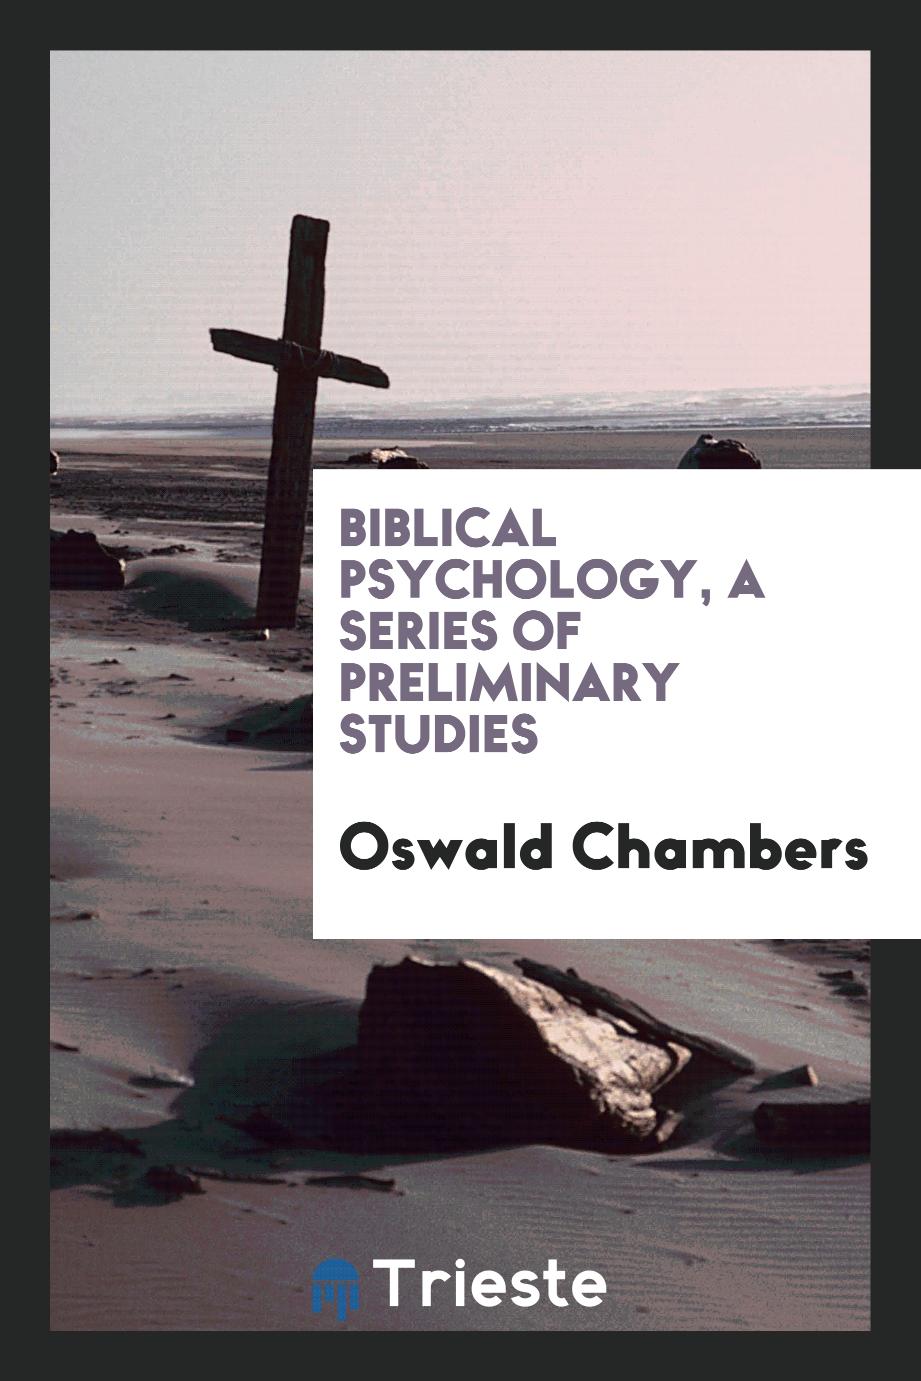 Biblical Psychology, a Series of Preliminary Studies